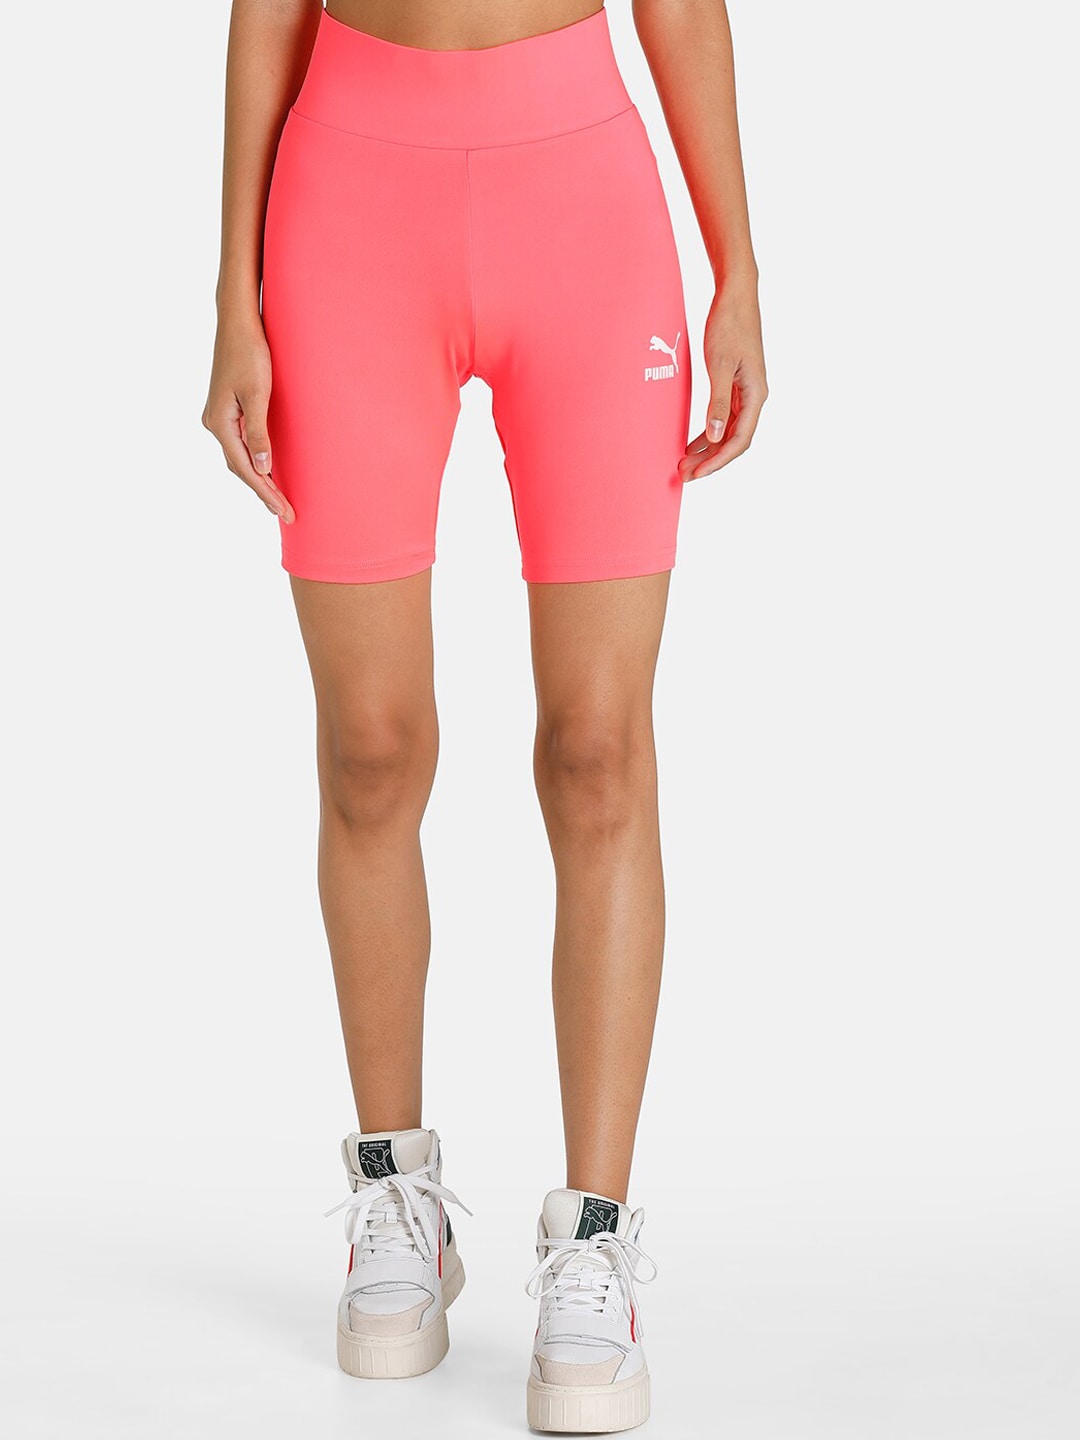 Puma Women Pink Summer Squezze Short Tights 7" Price in India